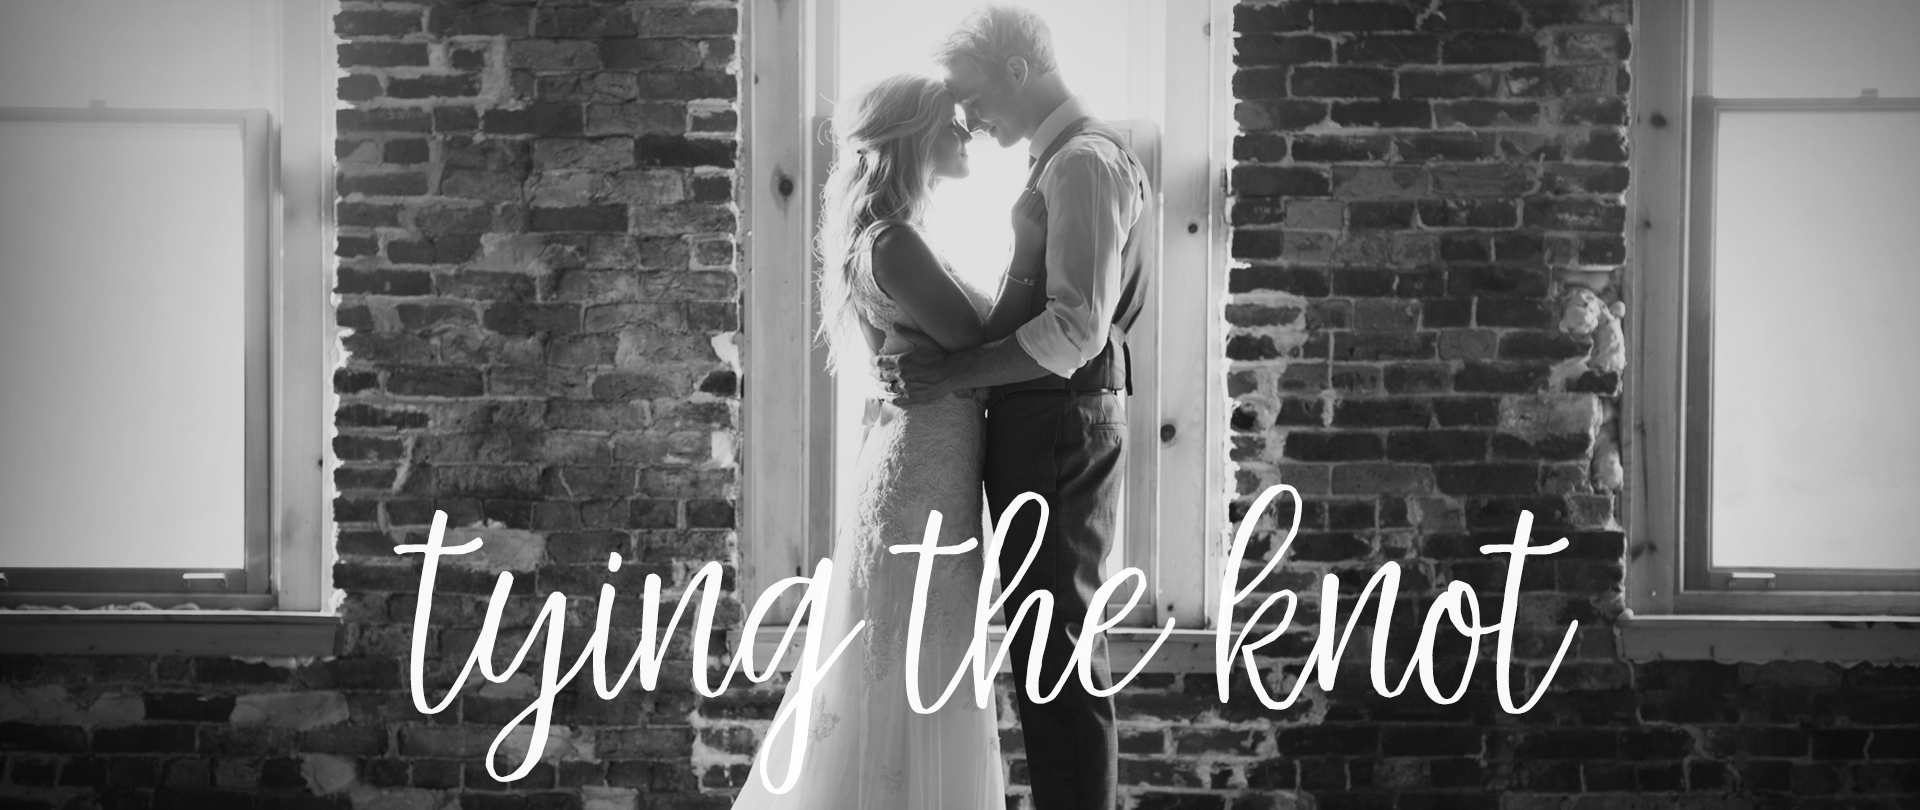 Tying the Knot
For Engaged Couples
